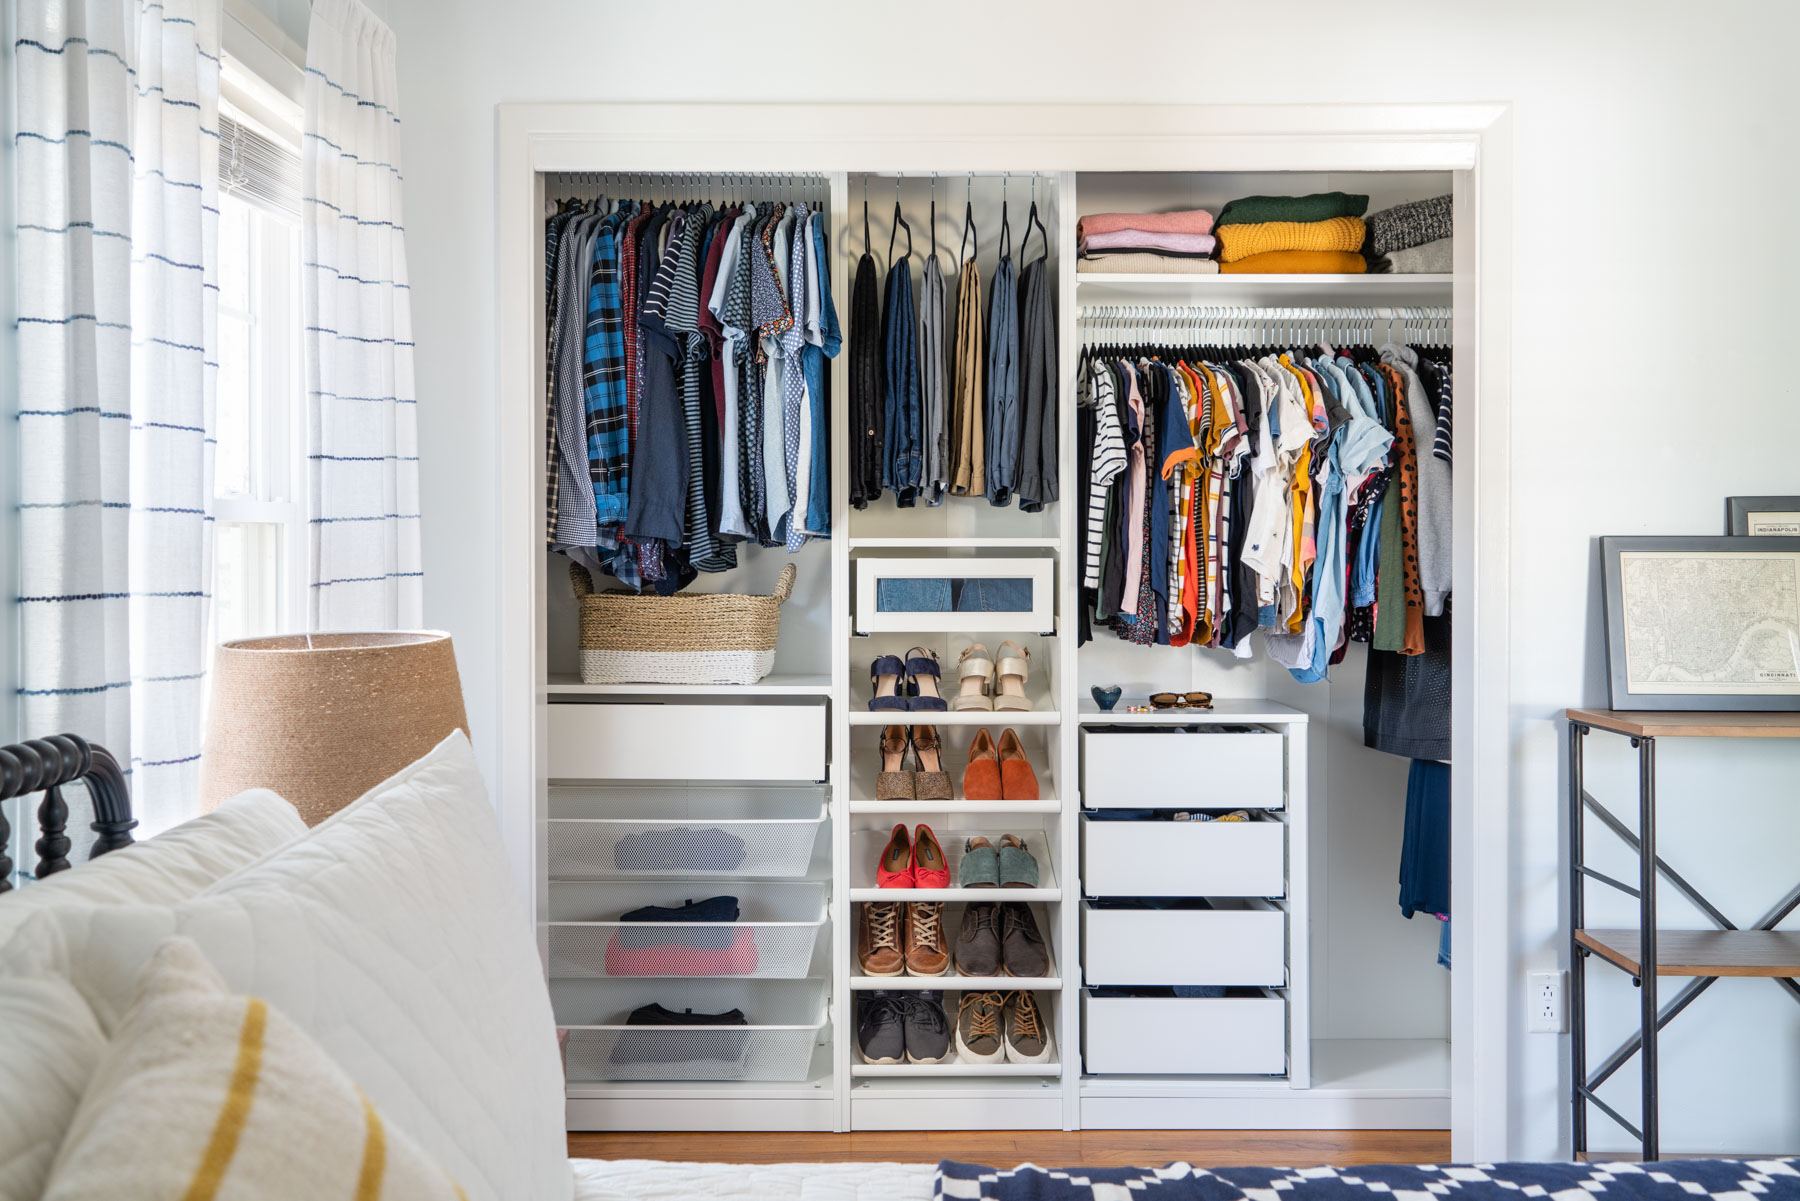 A master bedroom closet designed with IKEA PAX's wardrobe system